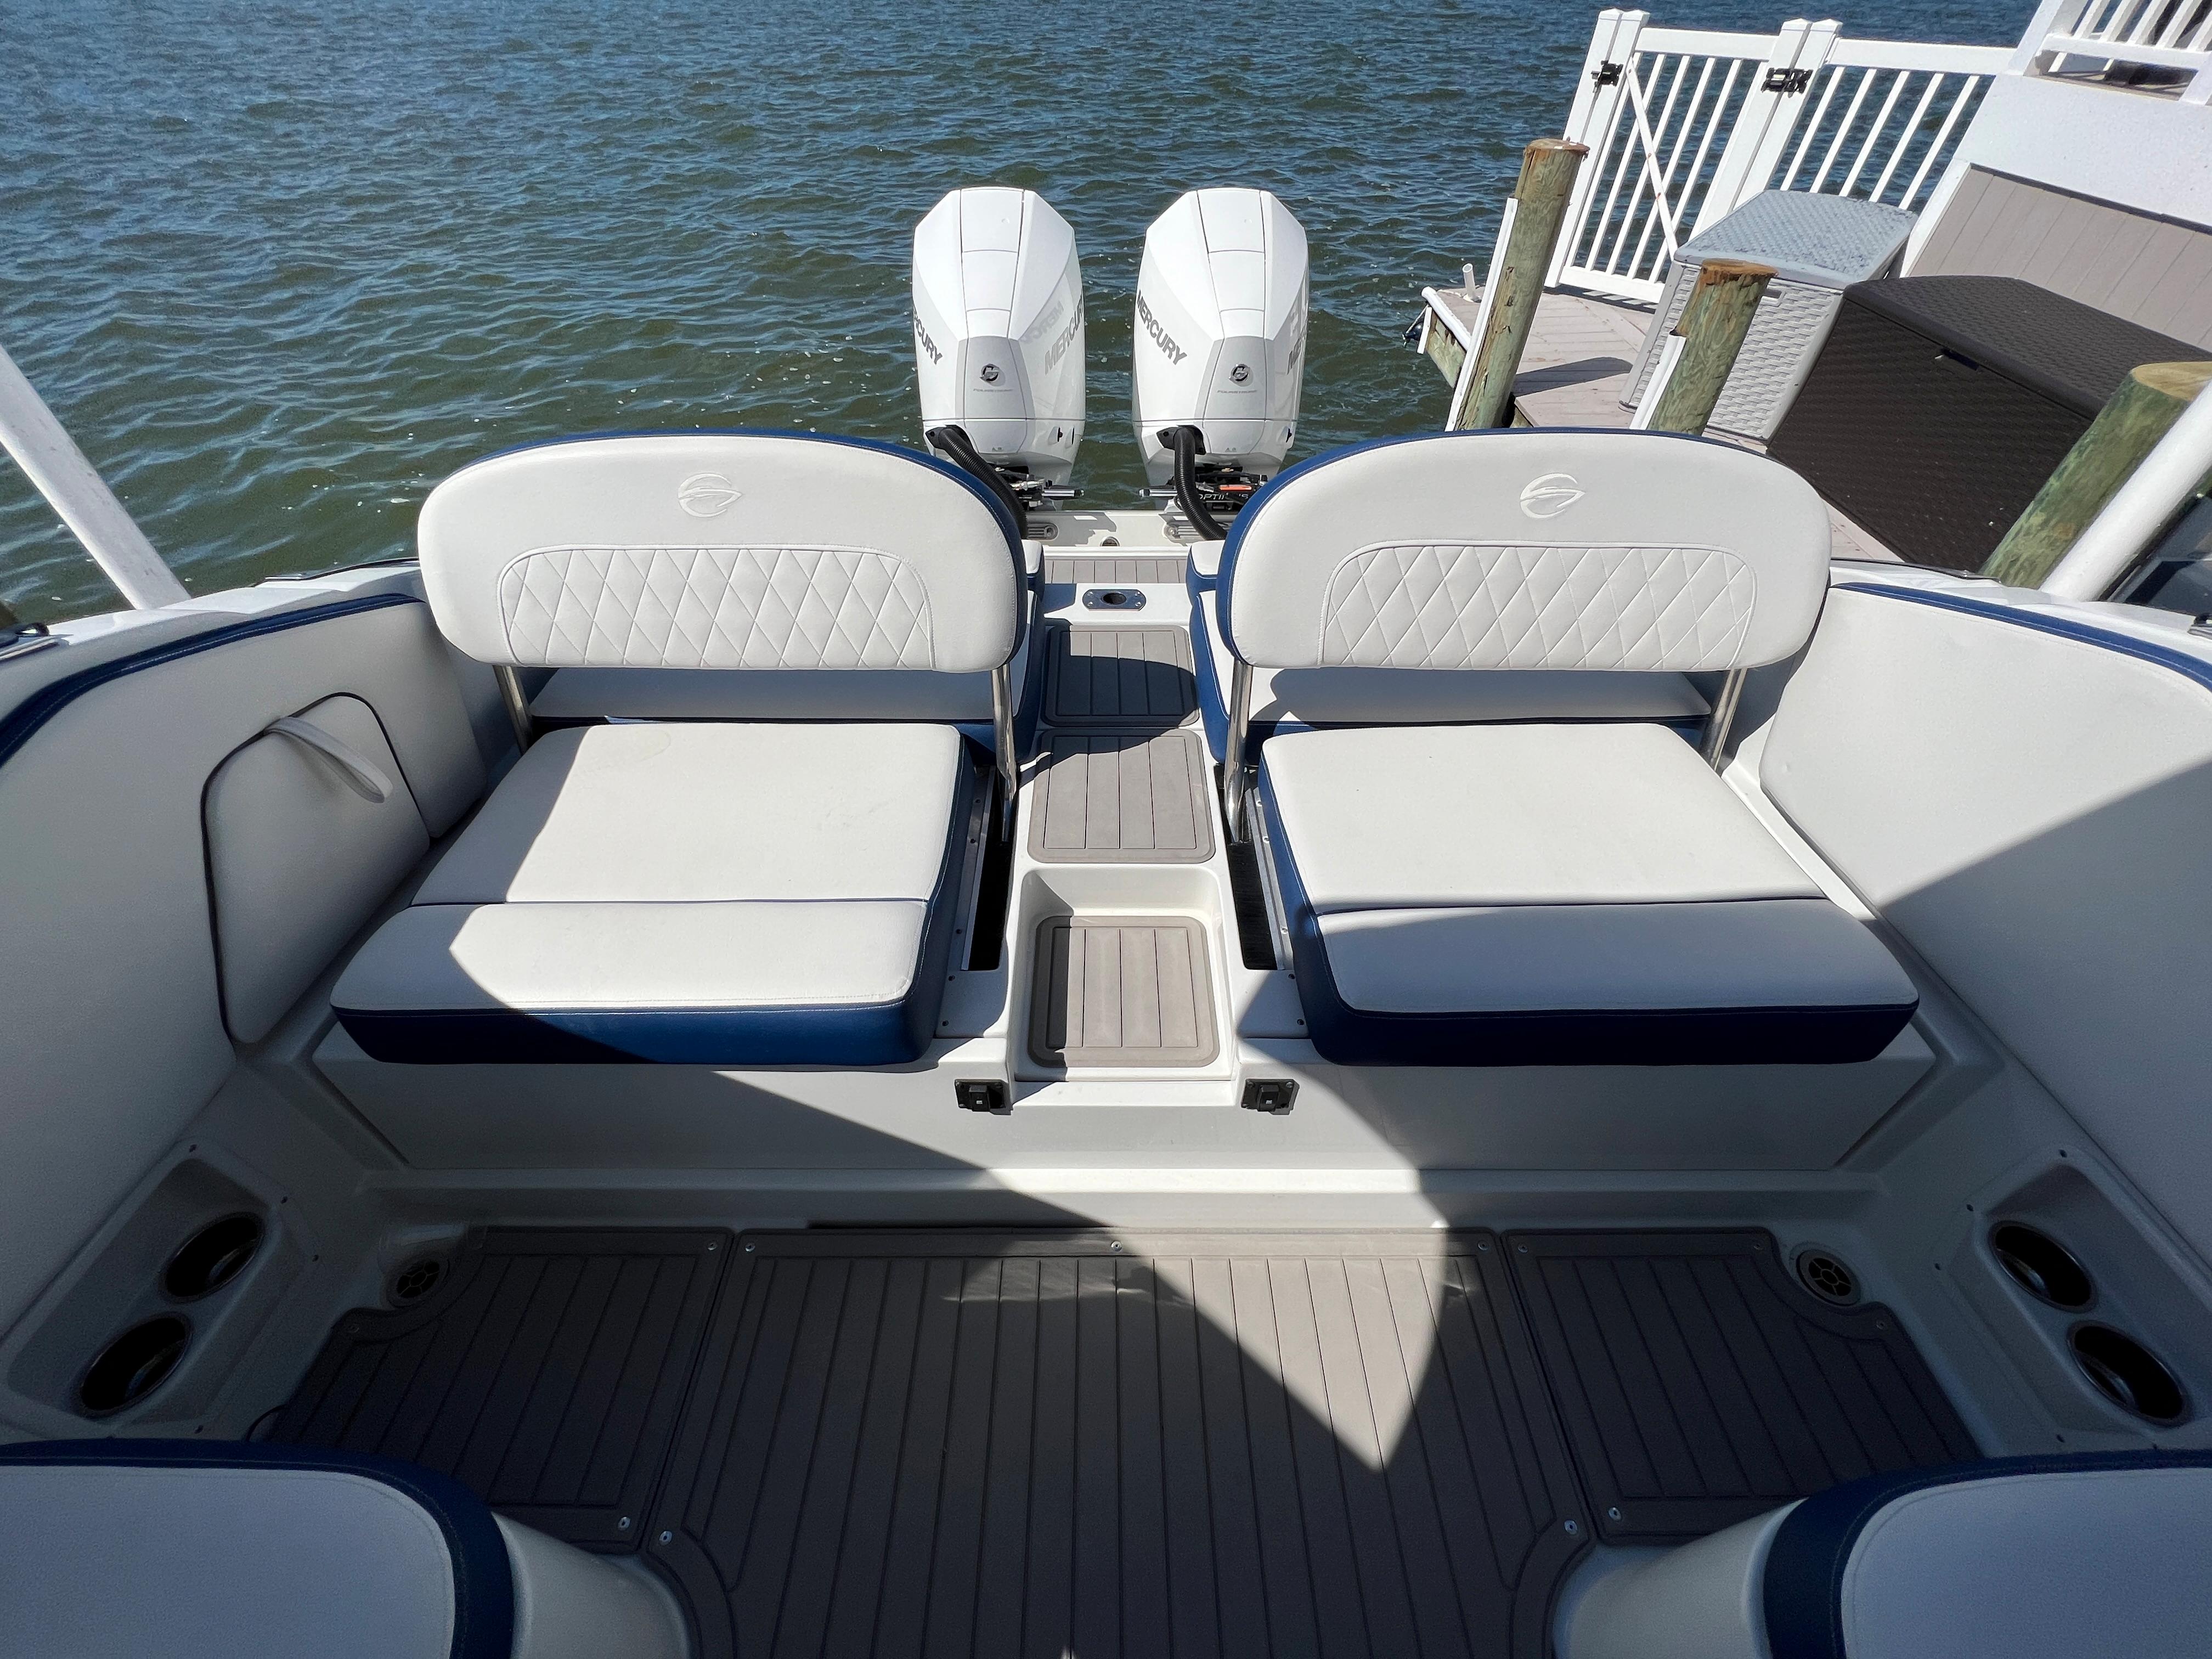 2022 Crownline E305 XS Aft Seating with Backrests Up 1